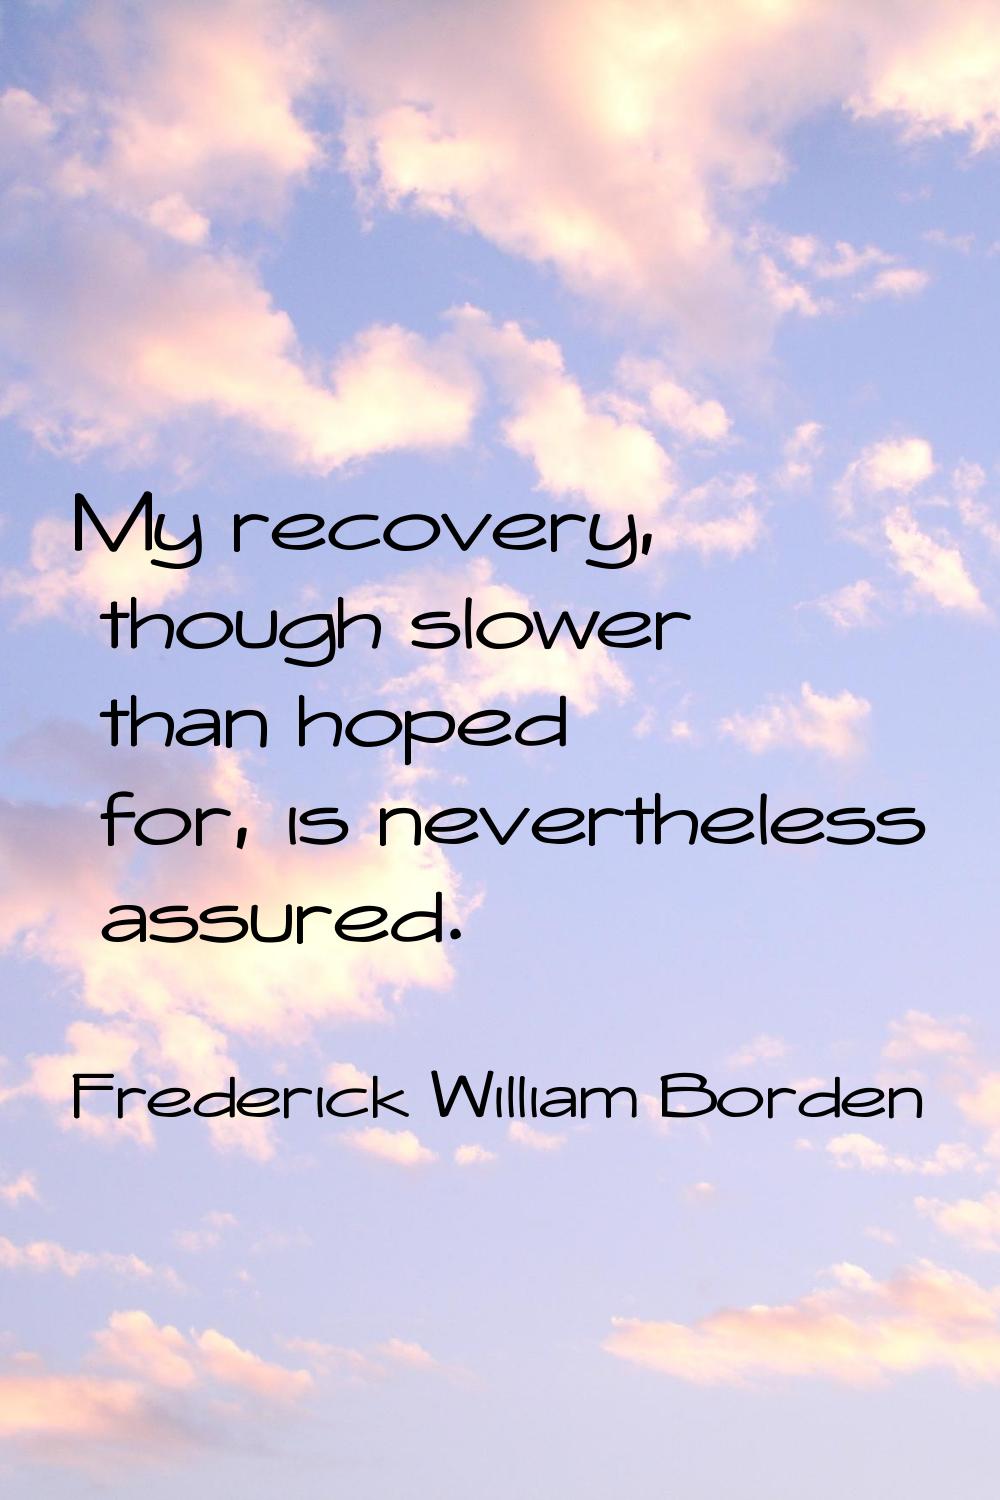 My recovery, though slower than hoped for, is nevertheless assured.